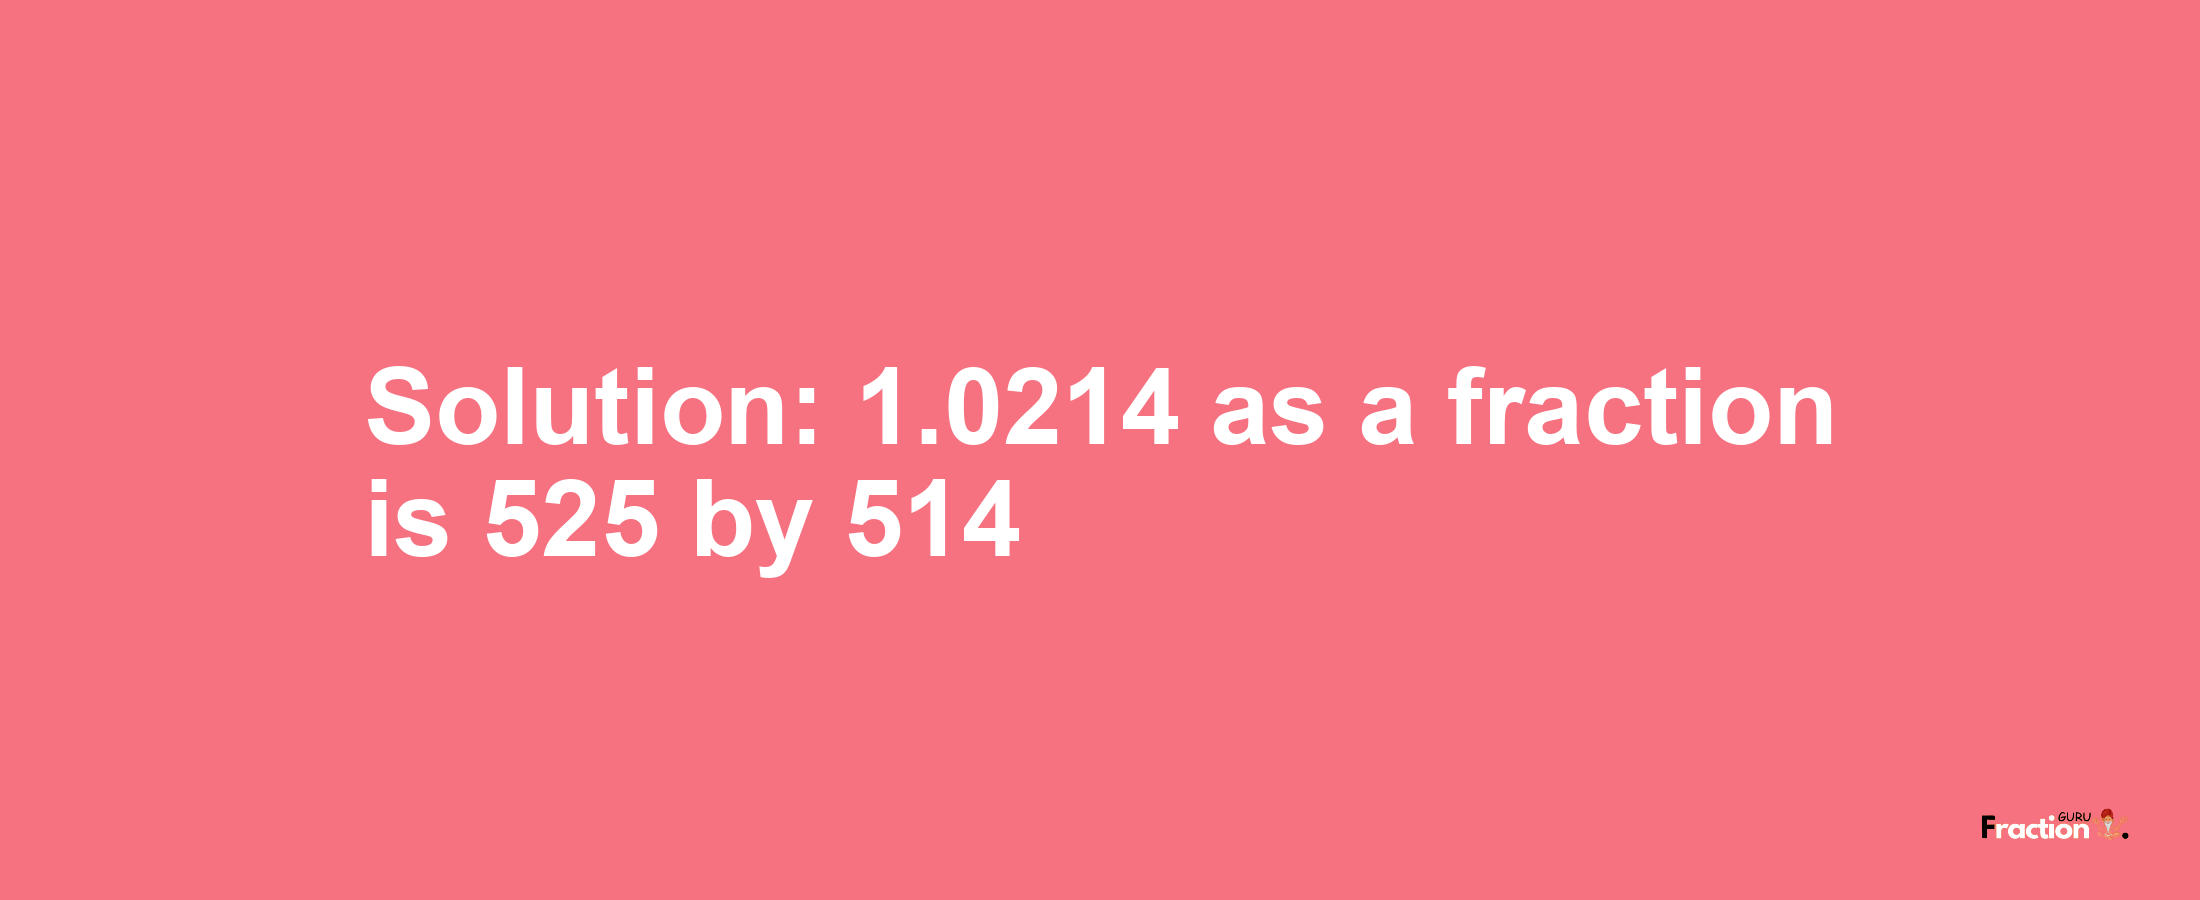 Solution:1.0214 as a fraction is 525/514